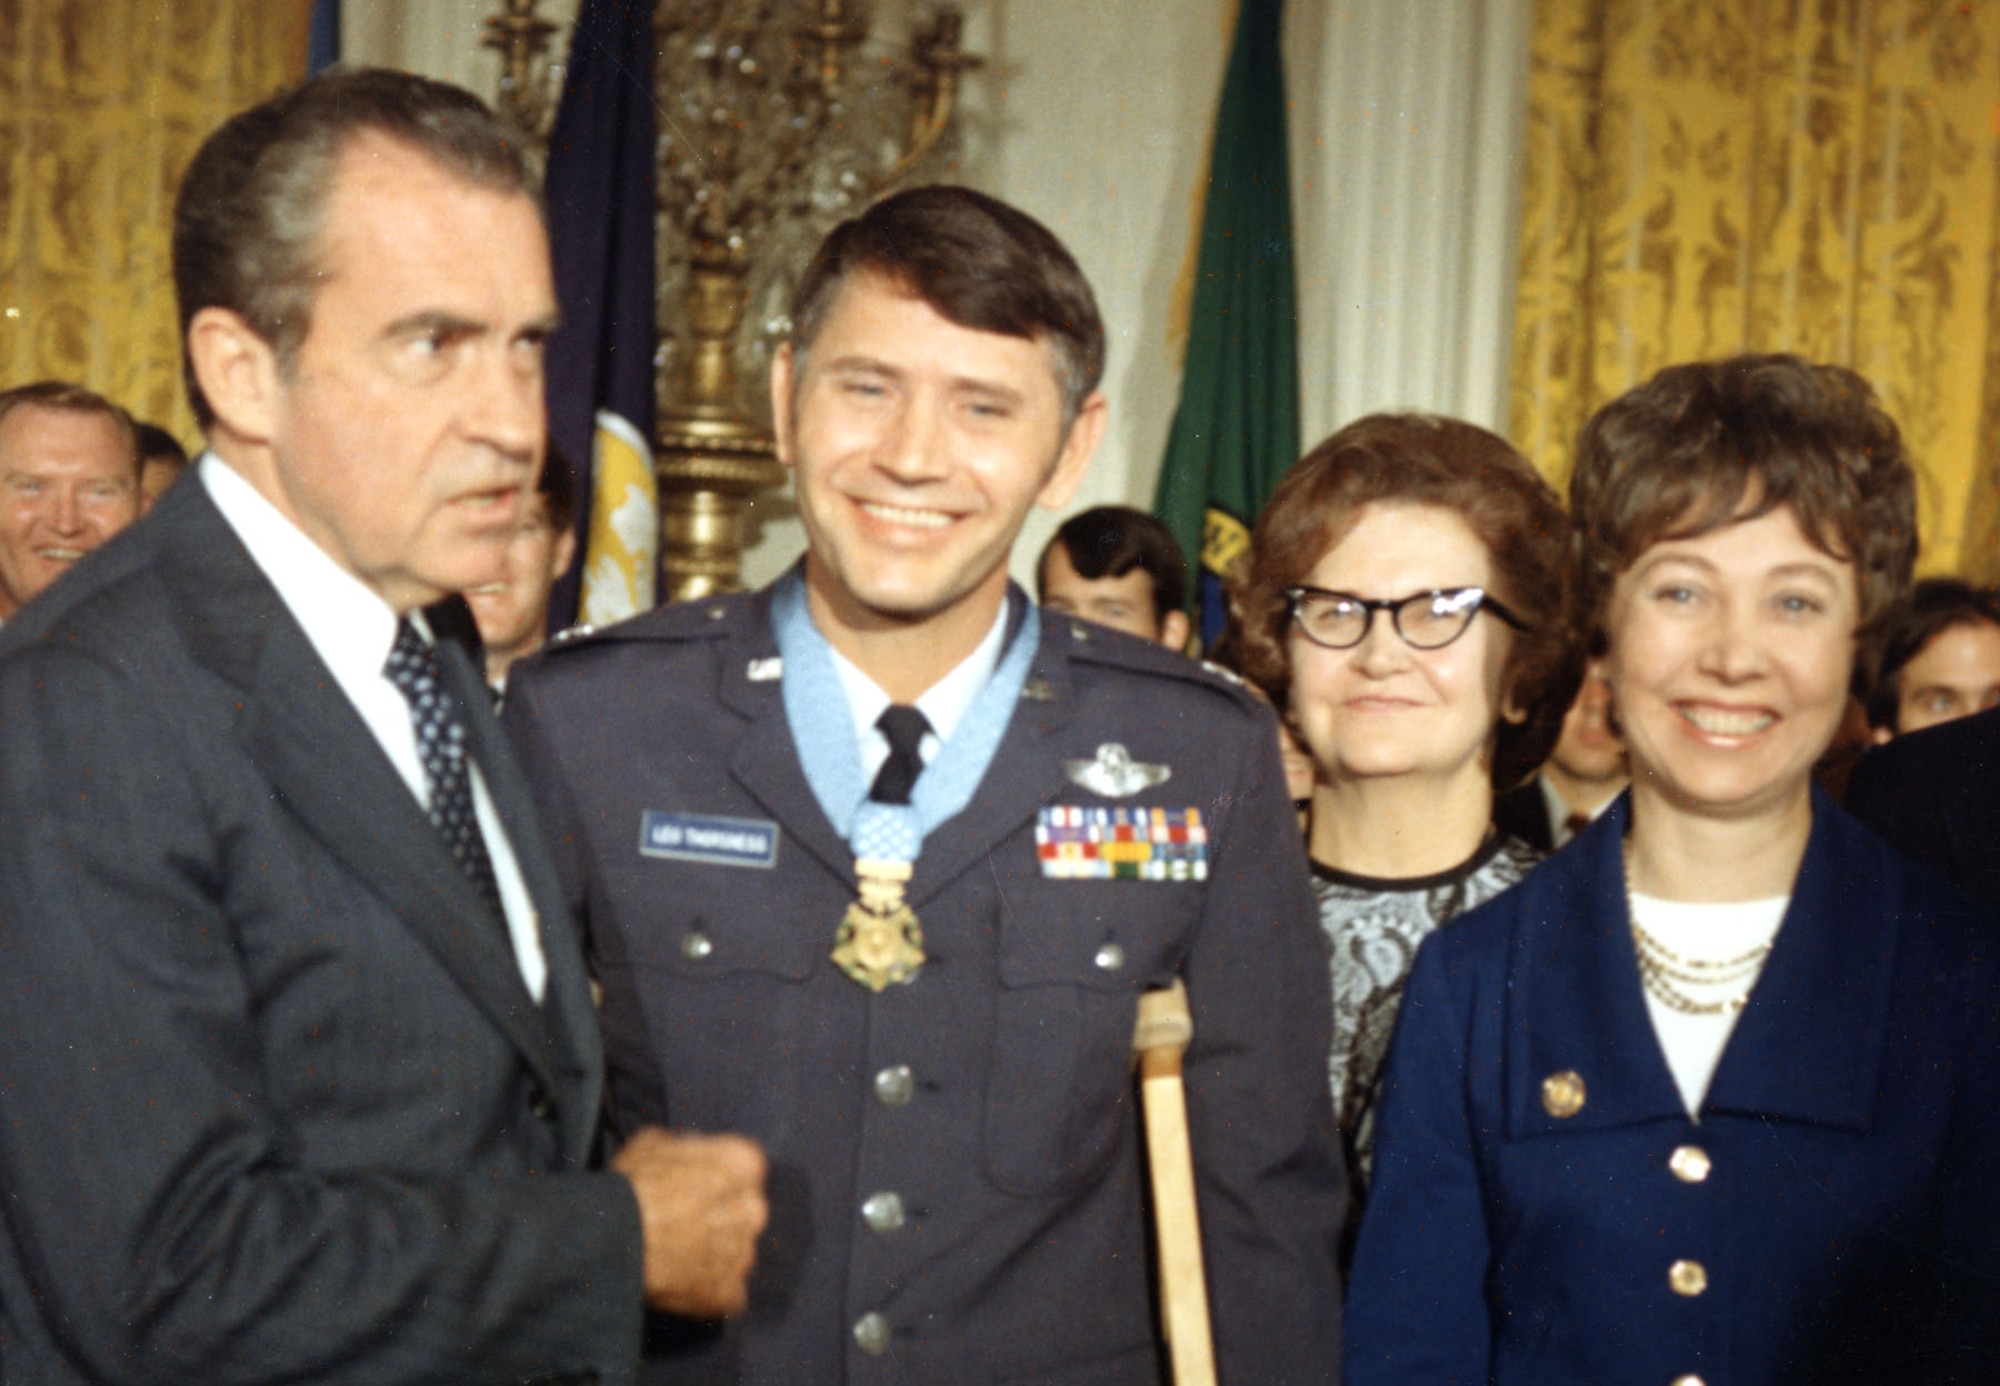 Pictured here is Col. Thorsness receiving the Medal of Honor from President Nixon after repatriation in 1973. Also pictured are his mother and his wife Gaylee. (U.S. Air Force photo)